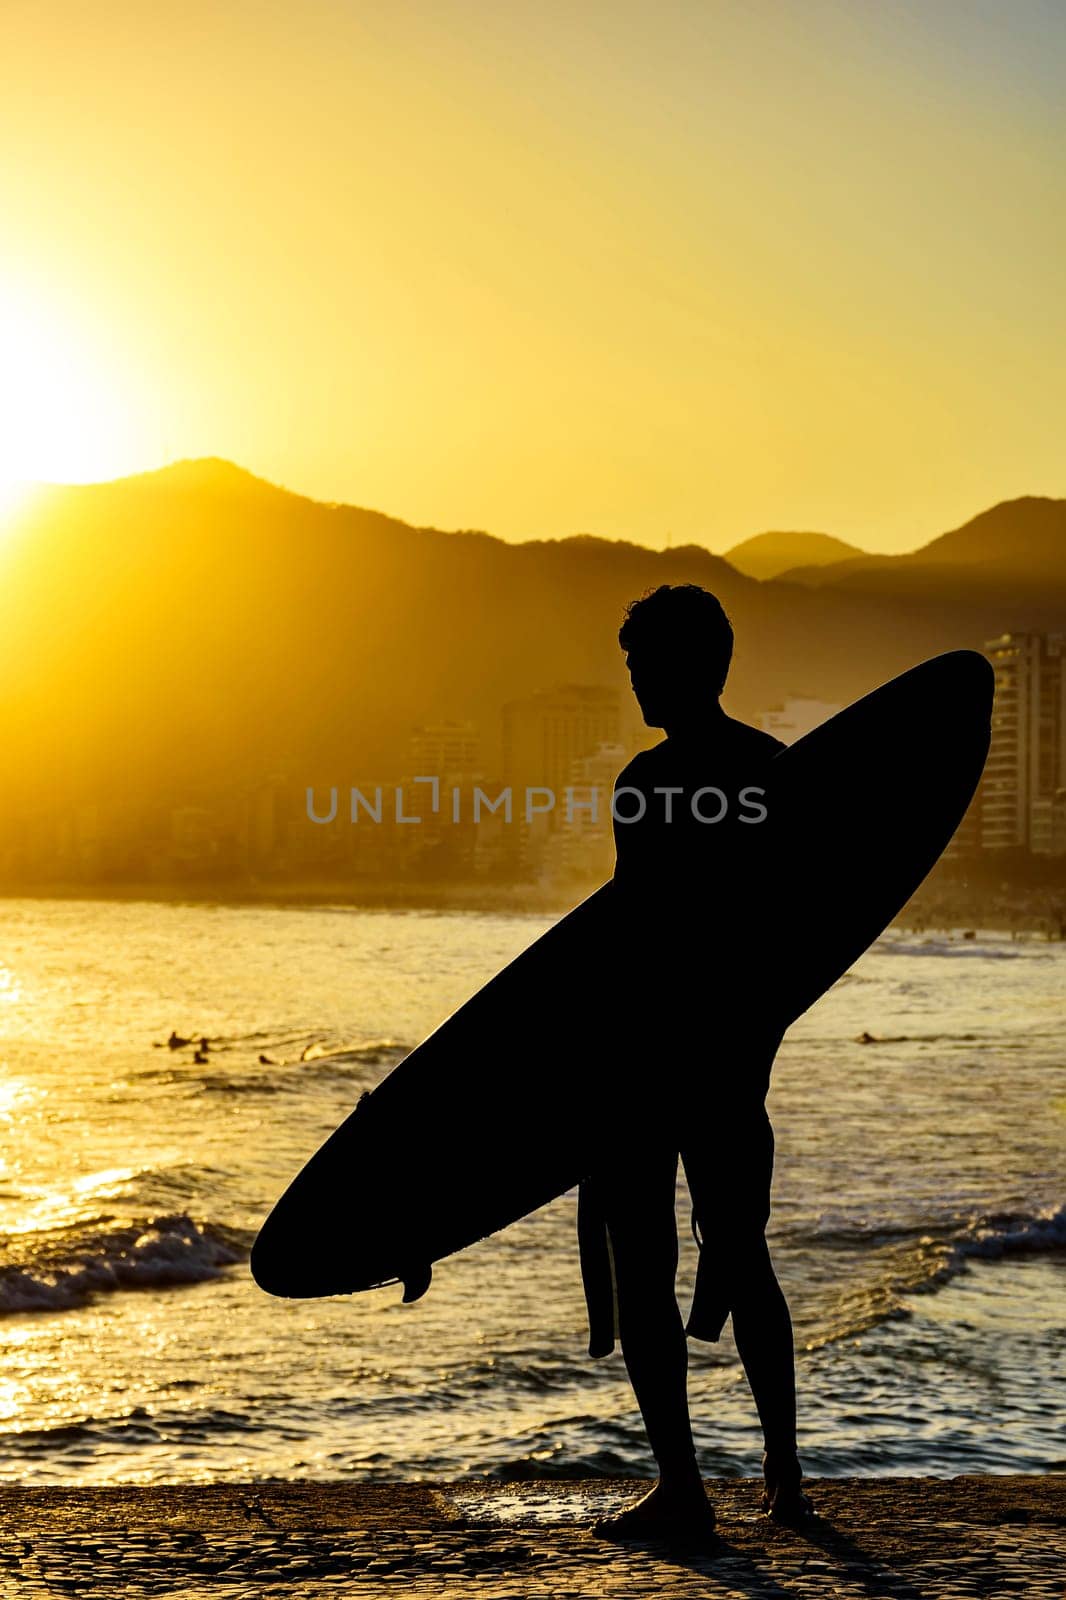 Surfer silhouette with his longboard looking at the Iapnema beach waves in Rio de Janeiro during sunset